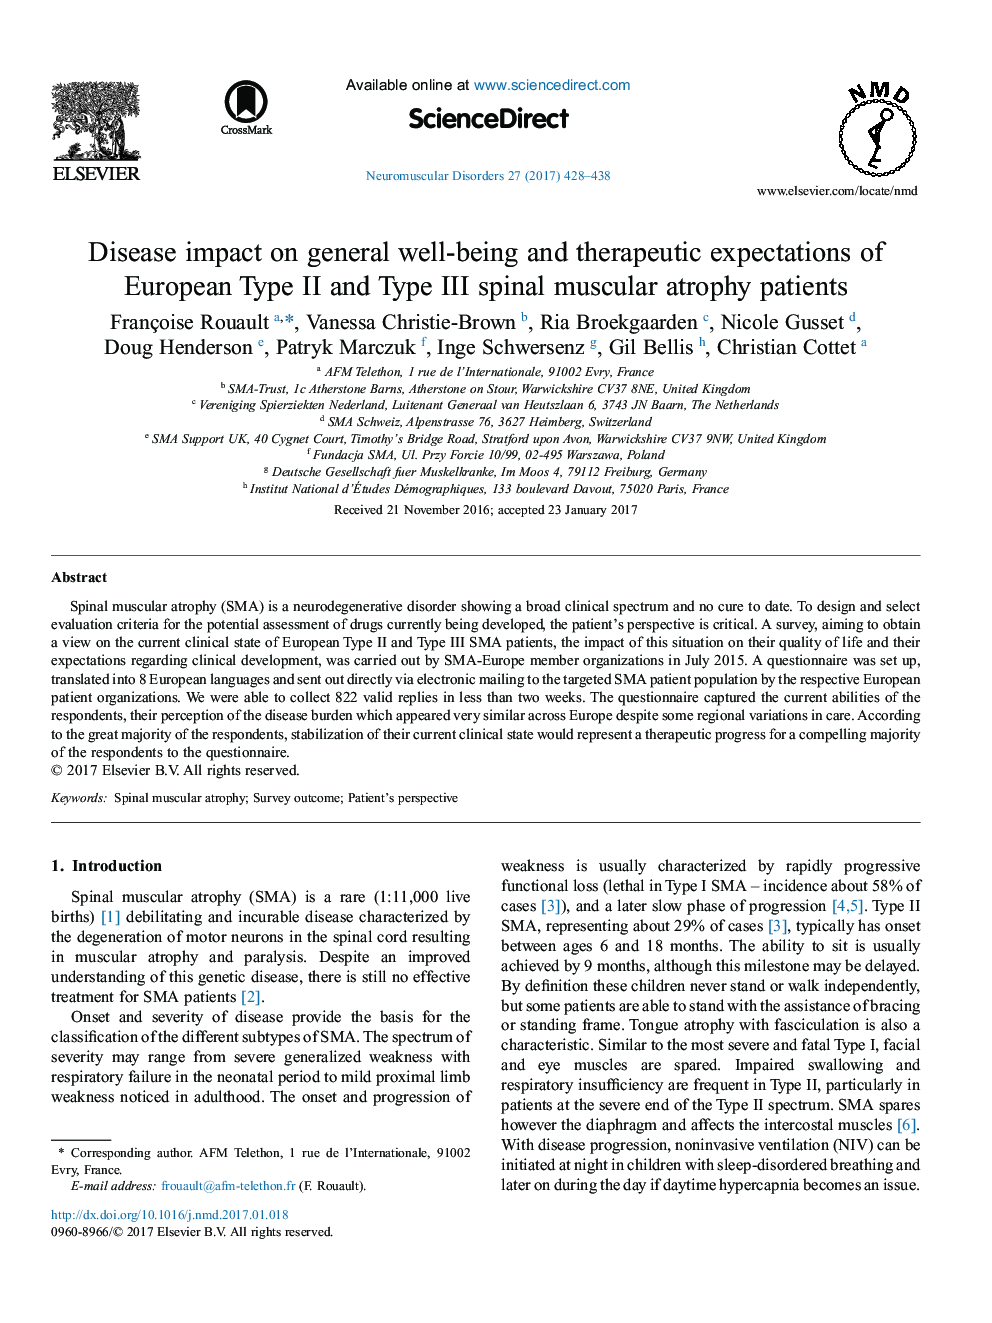 Disease impact on general well-being and therapeutic expectations of European Type II and Type III spinal muscular atrophy patients